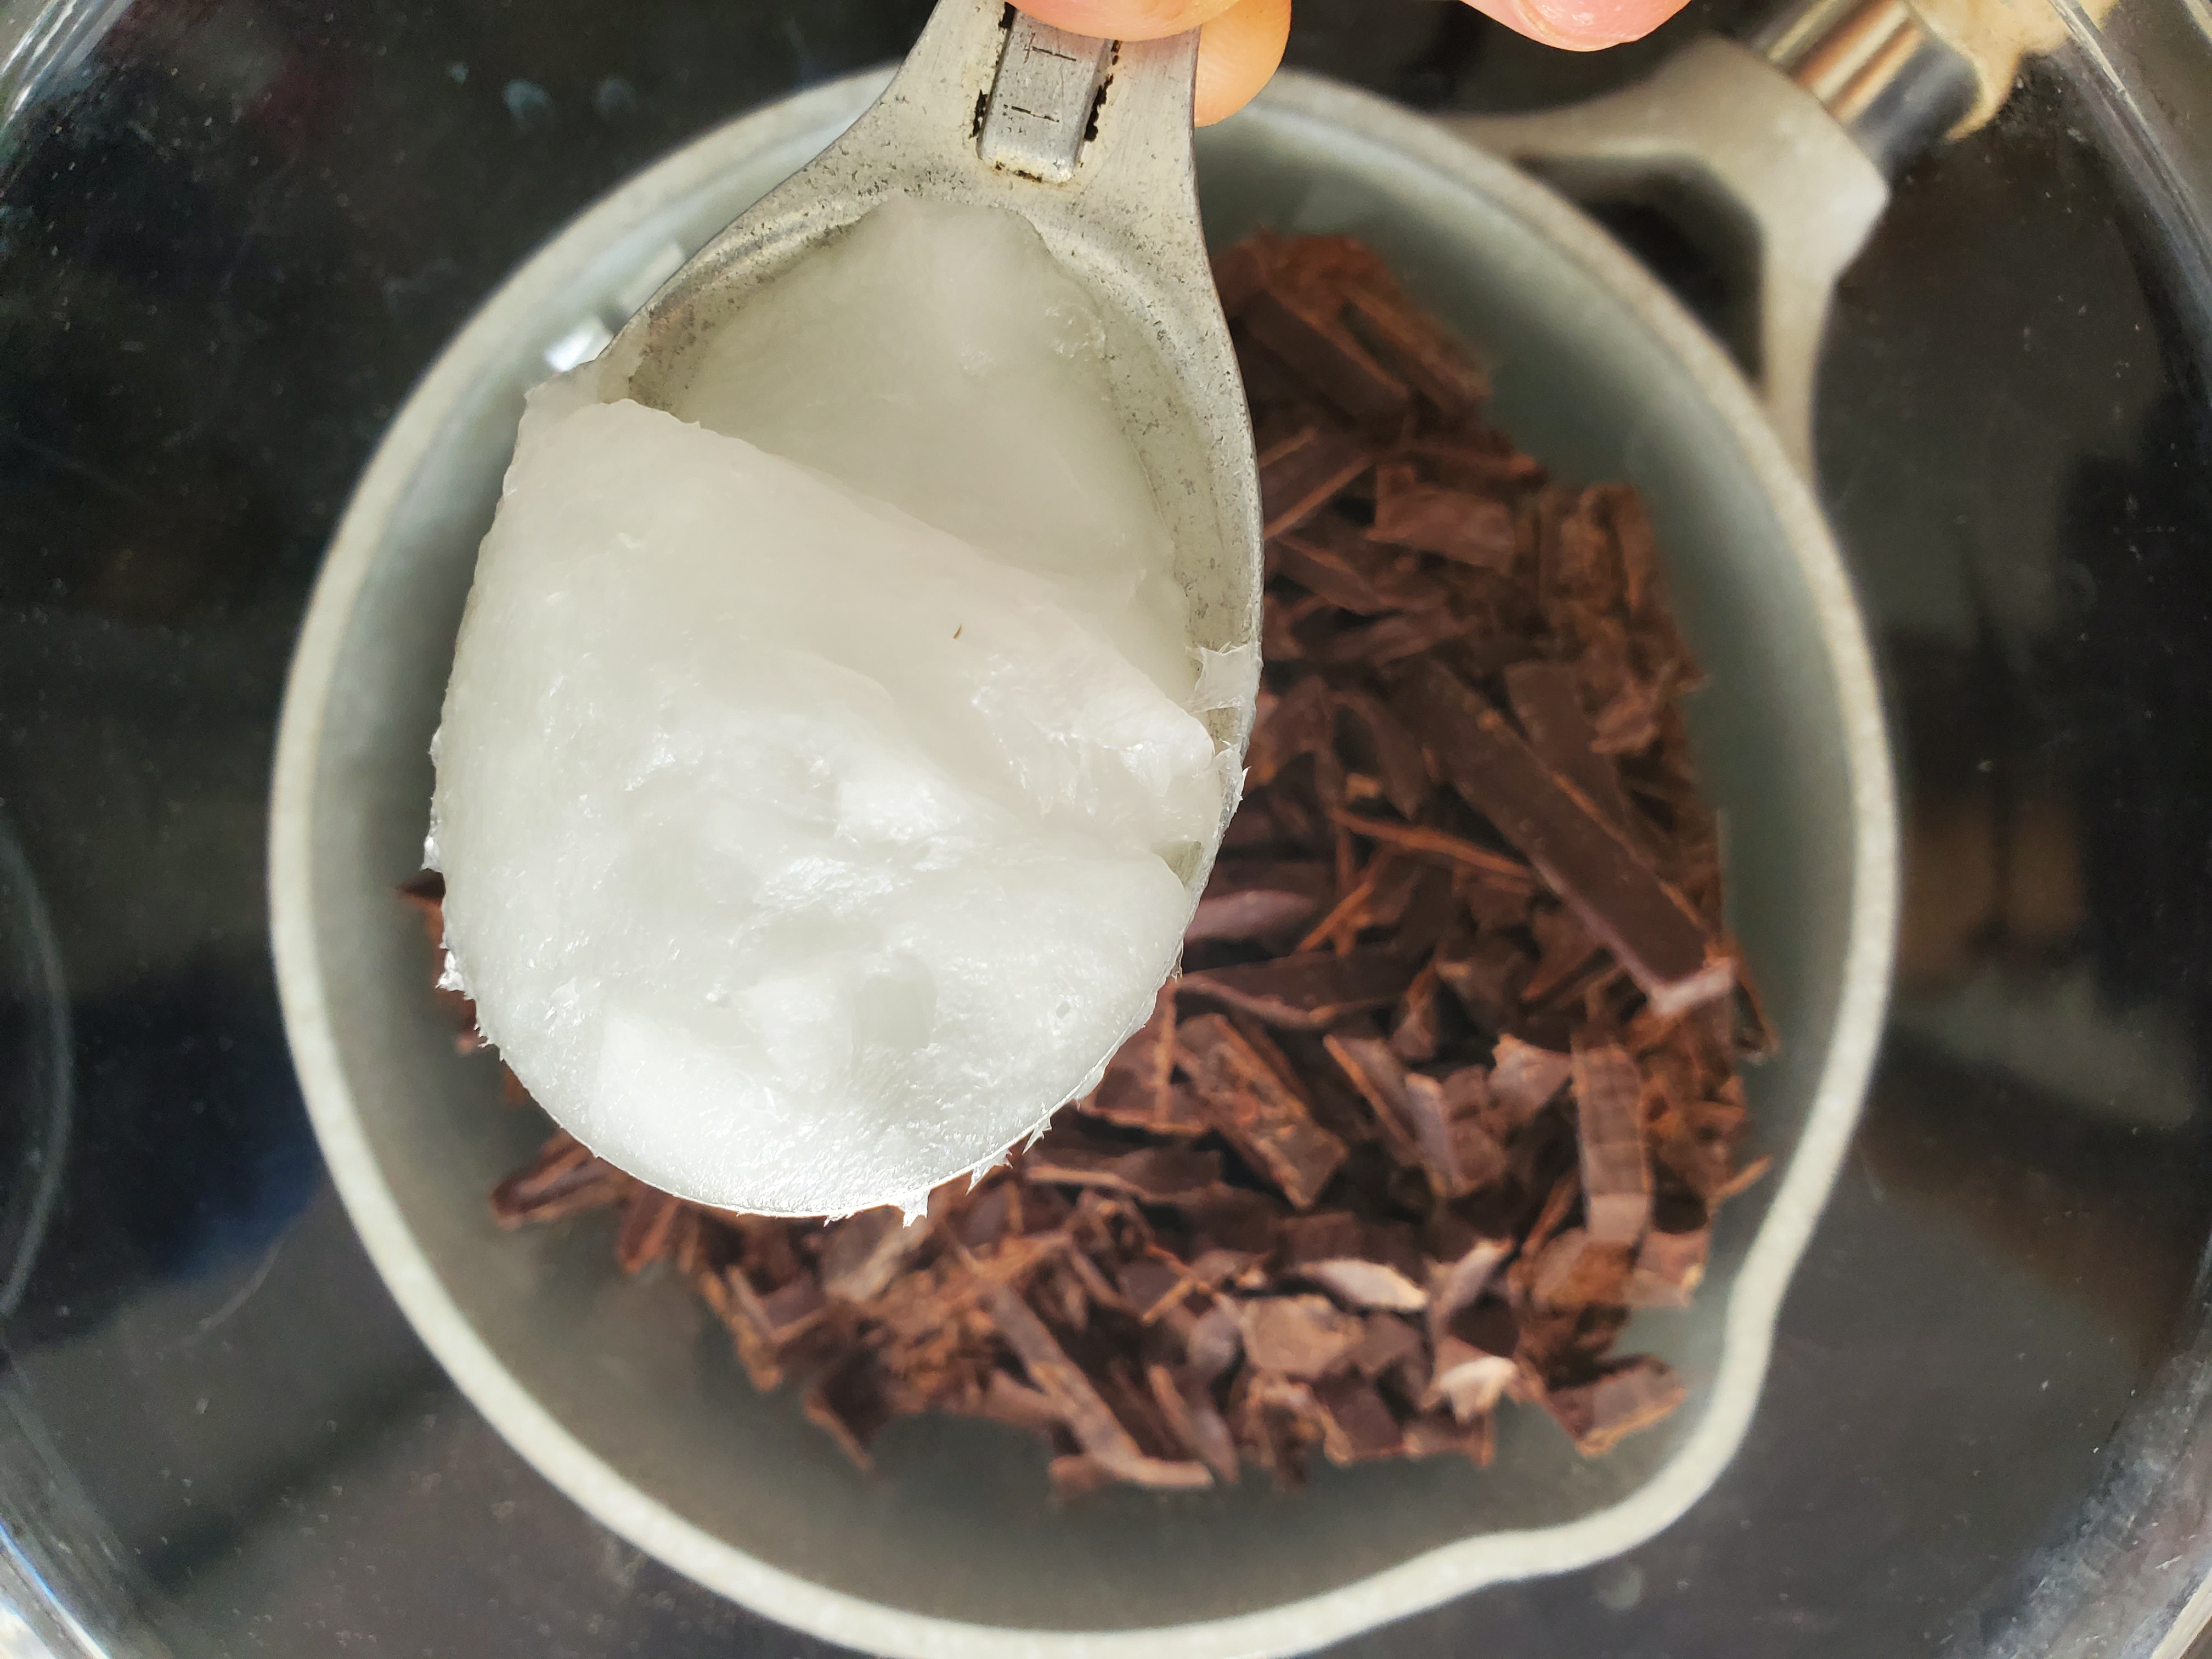 Coconut oil being added to a pot of chocolate to melt